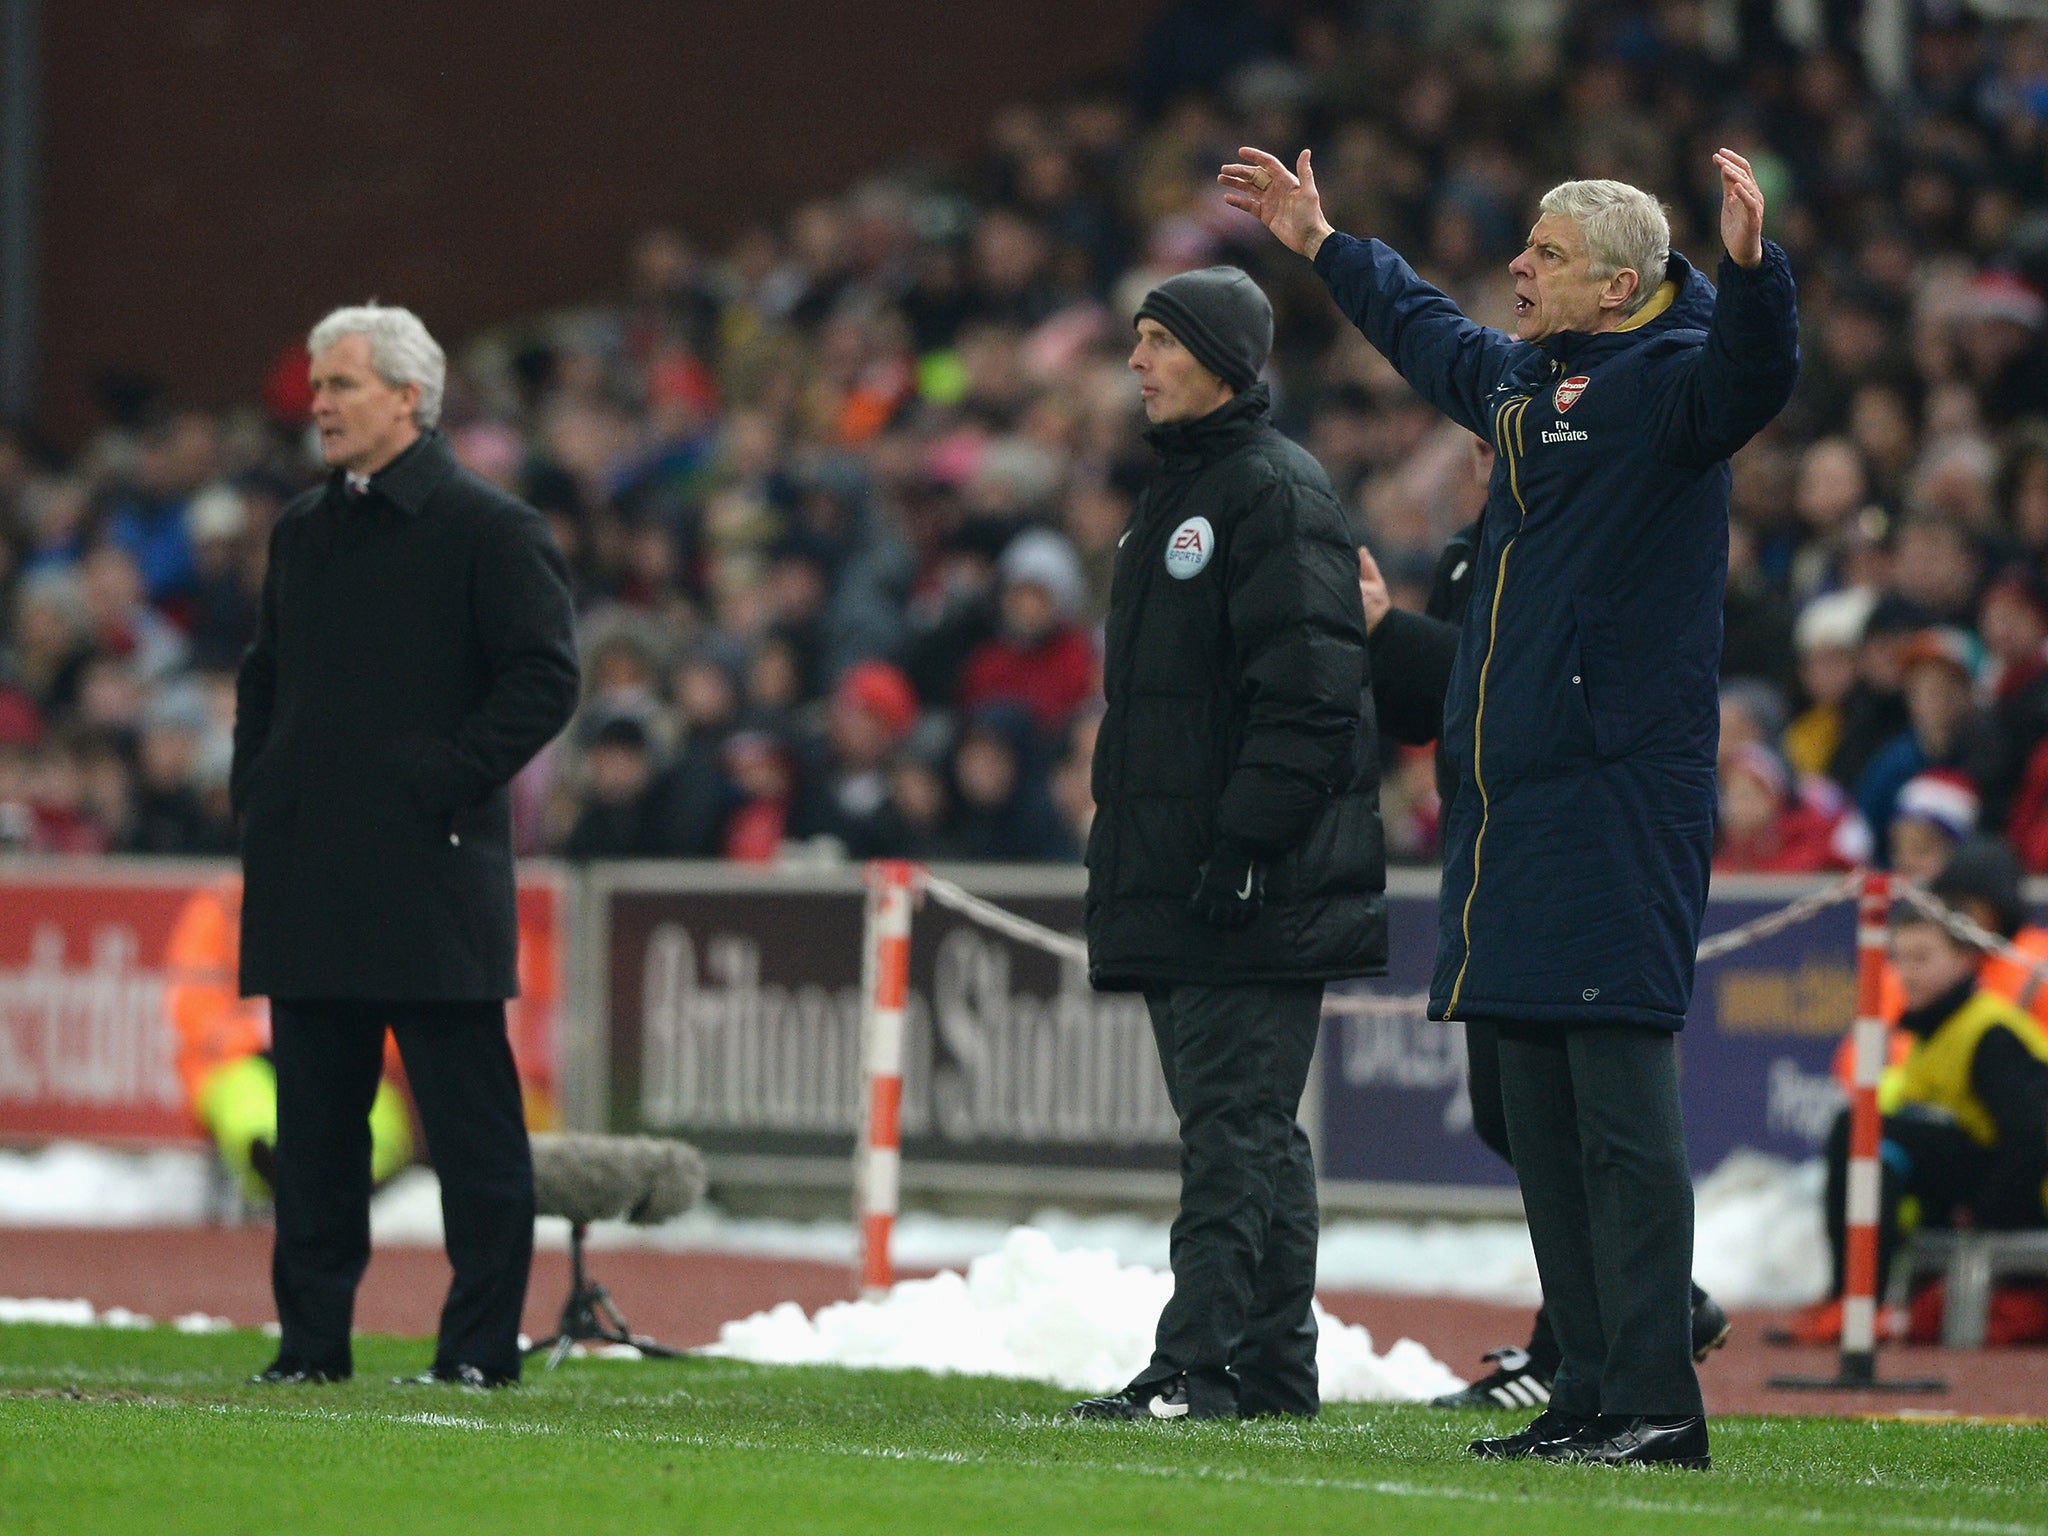 Arsene Wenger reacts on the touchline with Mark Hughes in view